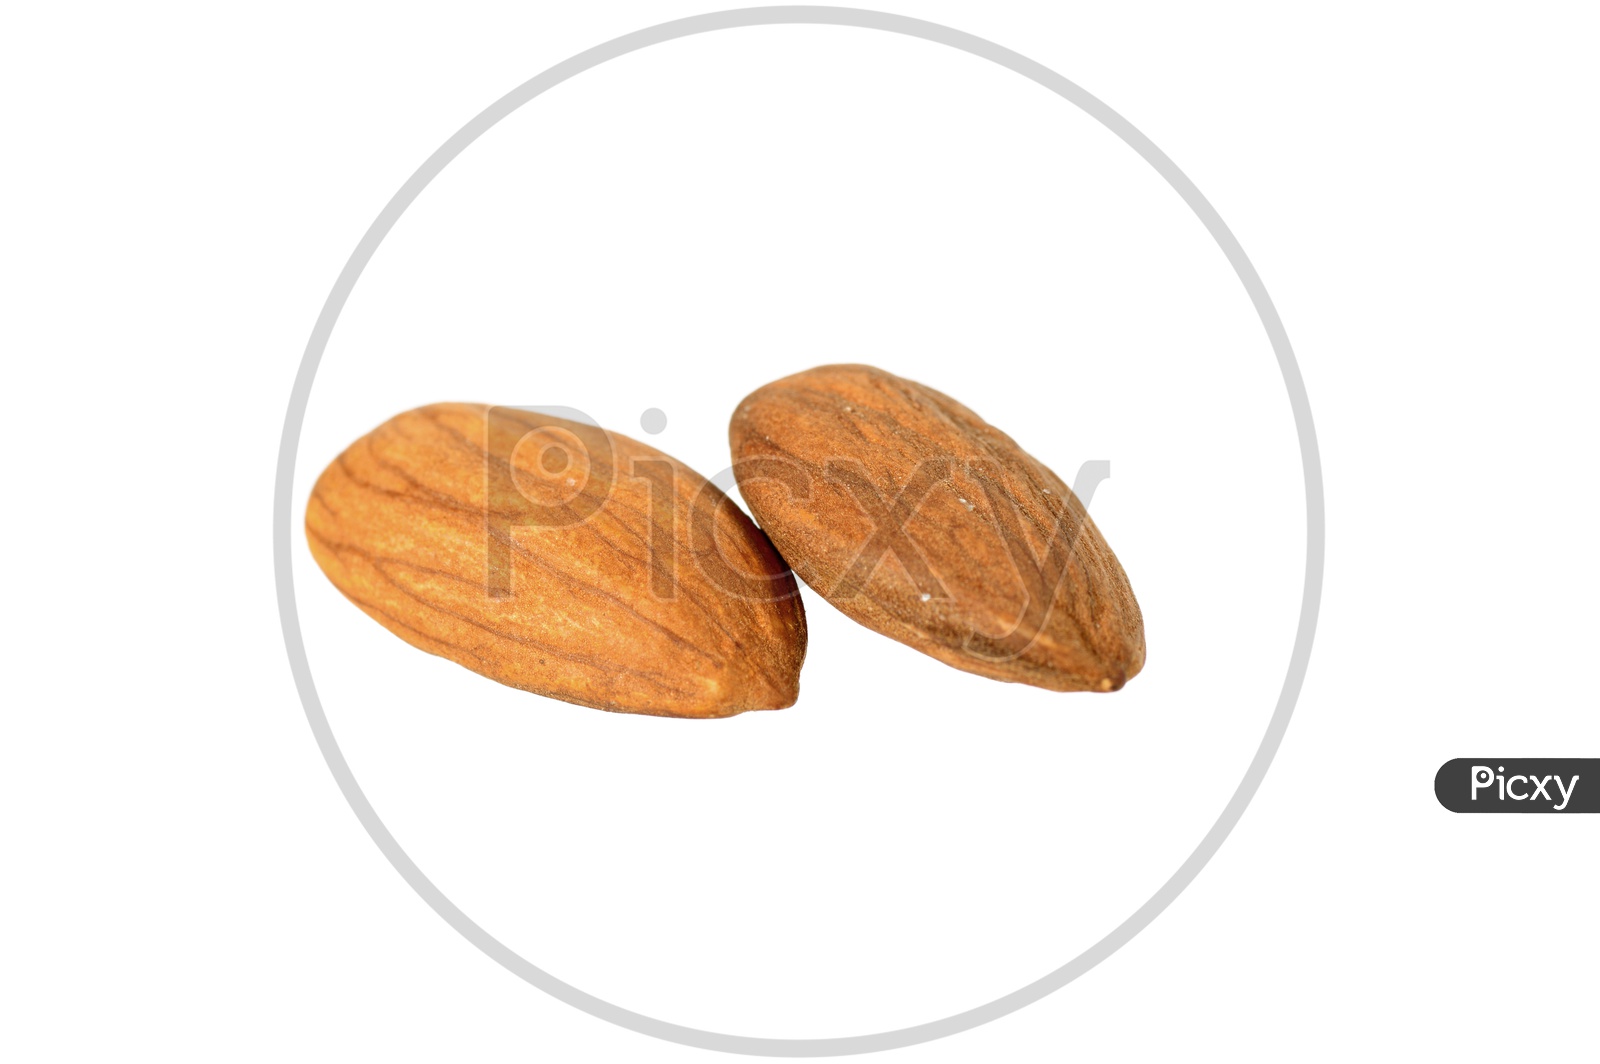 A Couple Of  Almond Or Badam Nuts on An Isolated White Background